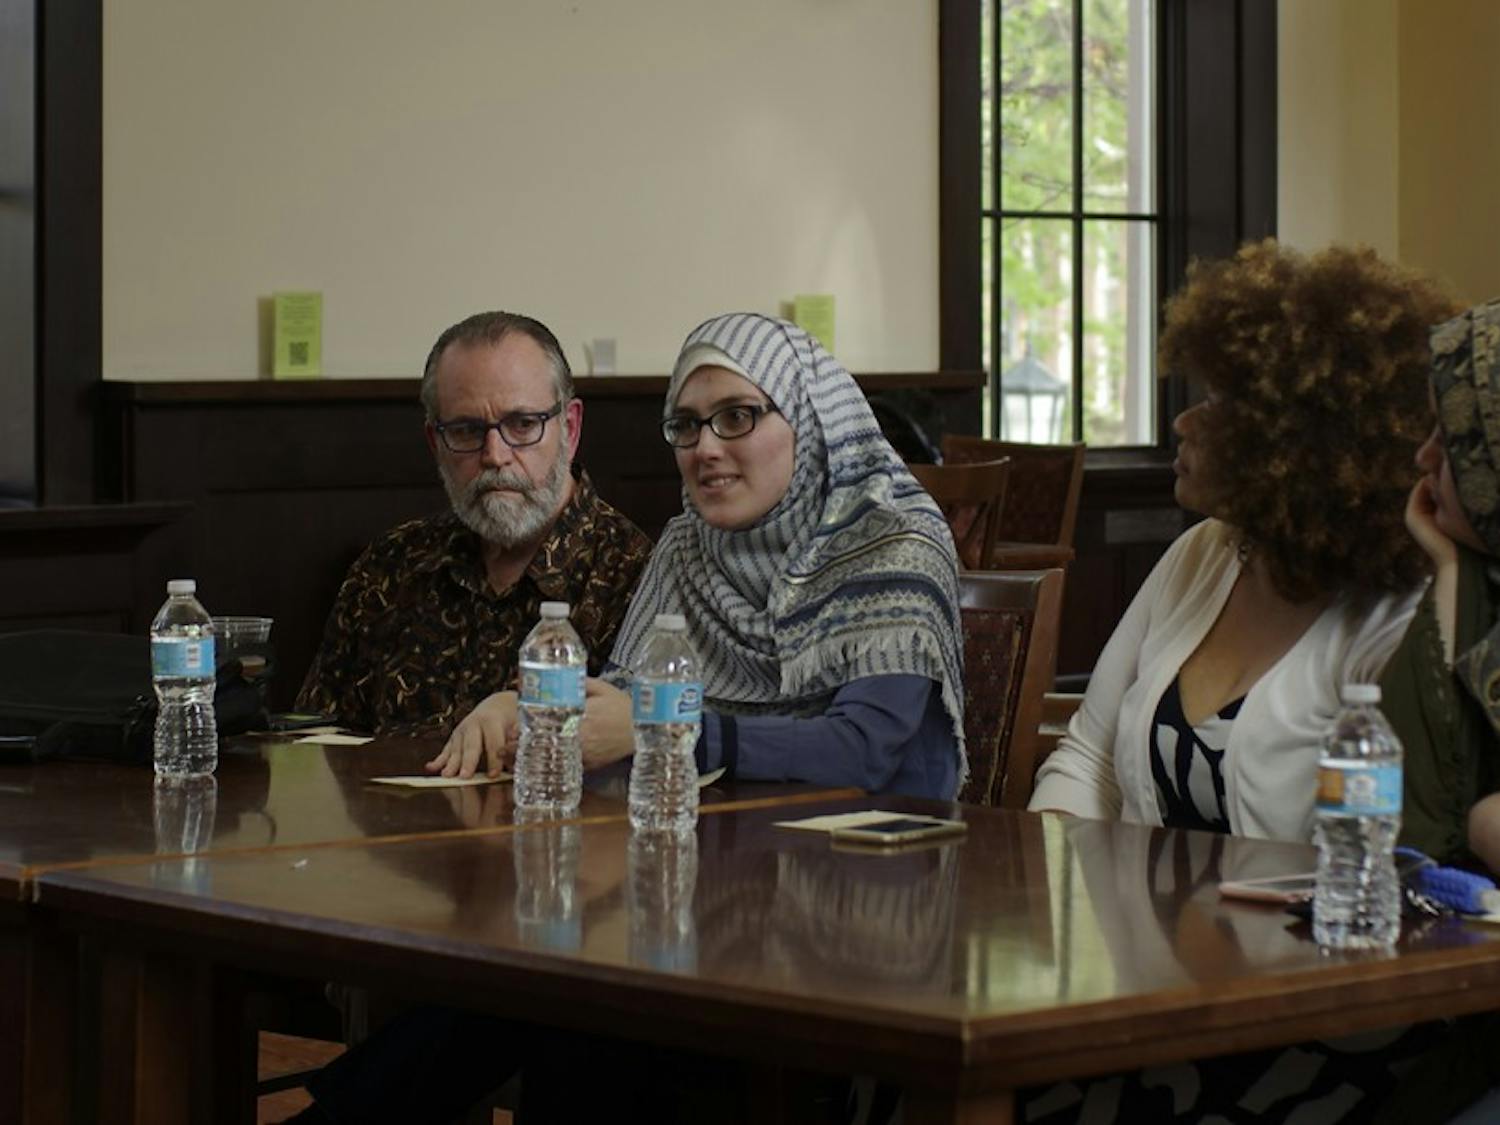 From Left, Professor Carl Ernst, Soumaya Lansari, Iyman Gaspard and Mariam Baaj speak at the Understanding Muslims and Islam Panel at the Campus Y on Monday.